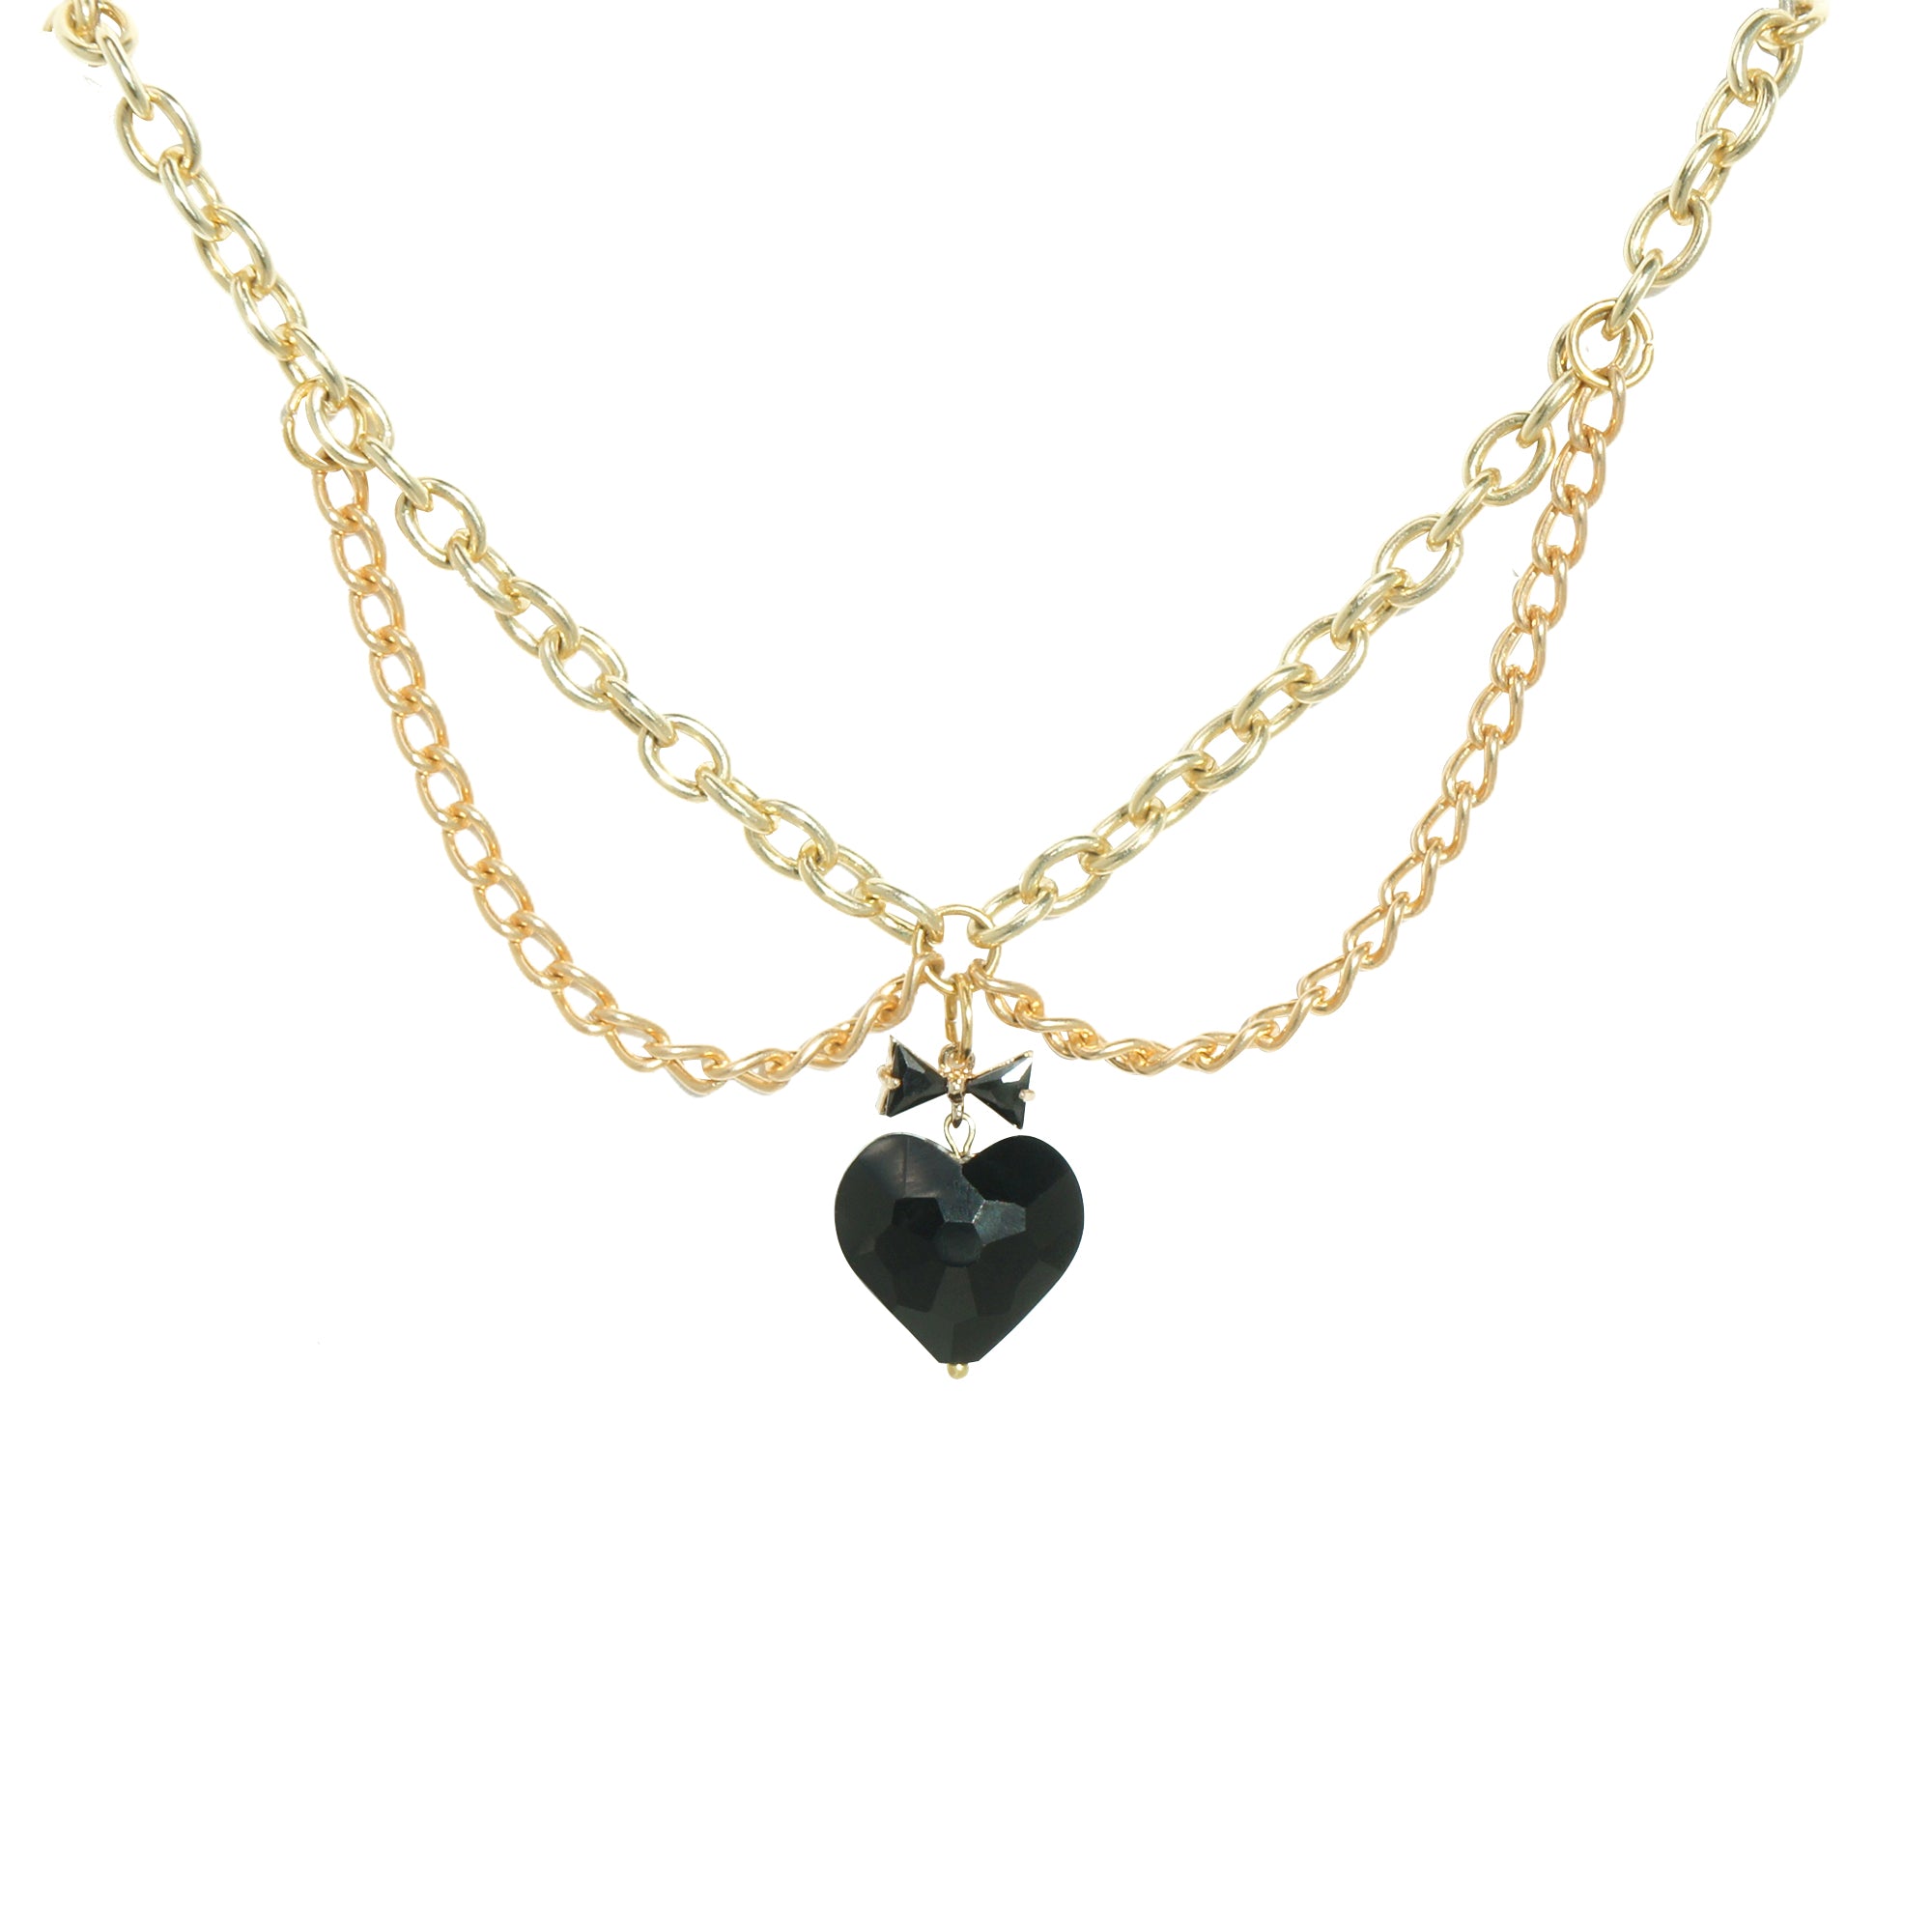 Whisper of Heart Chain Choker Necklace with Black Faceted Glass Heart Pendant